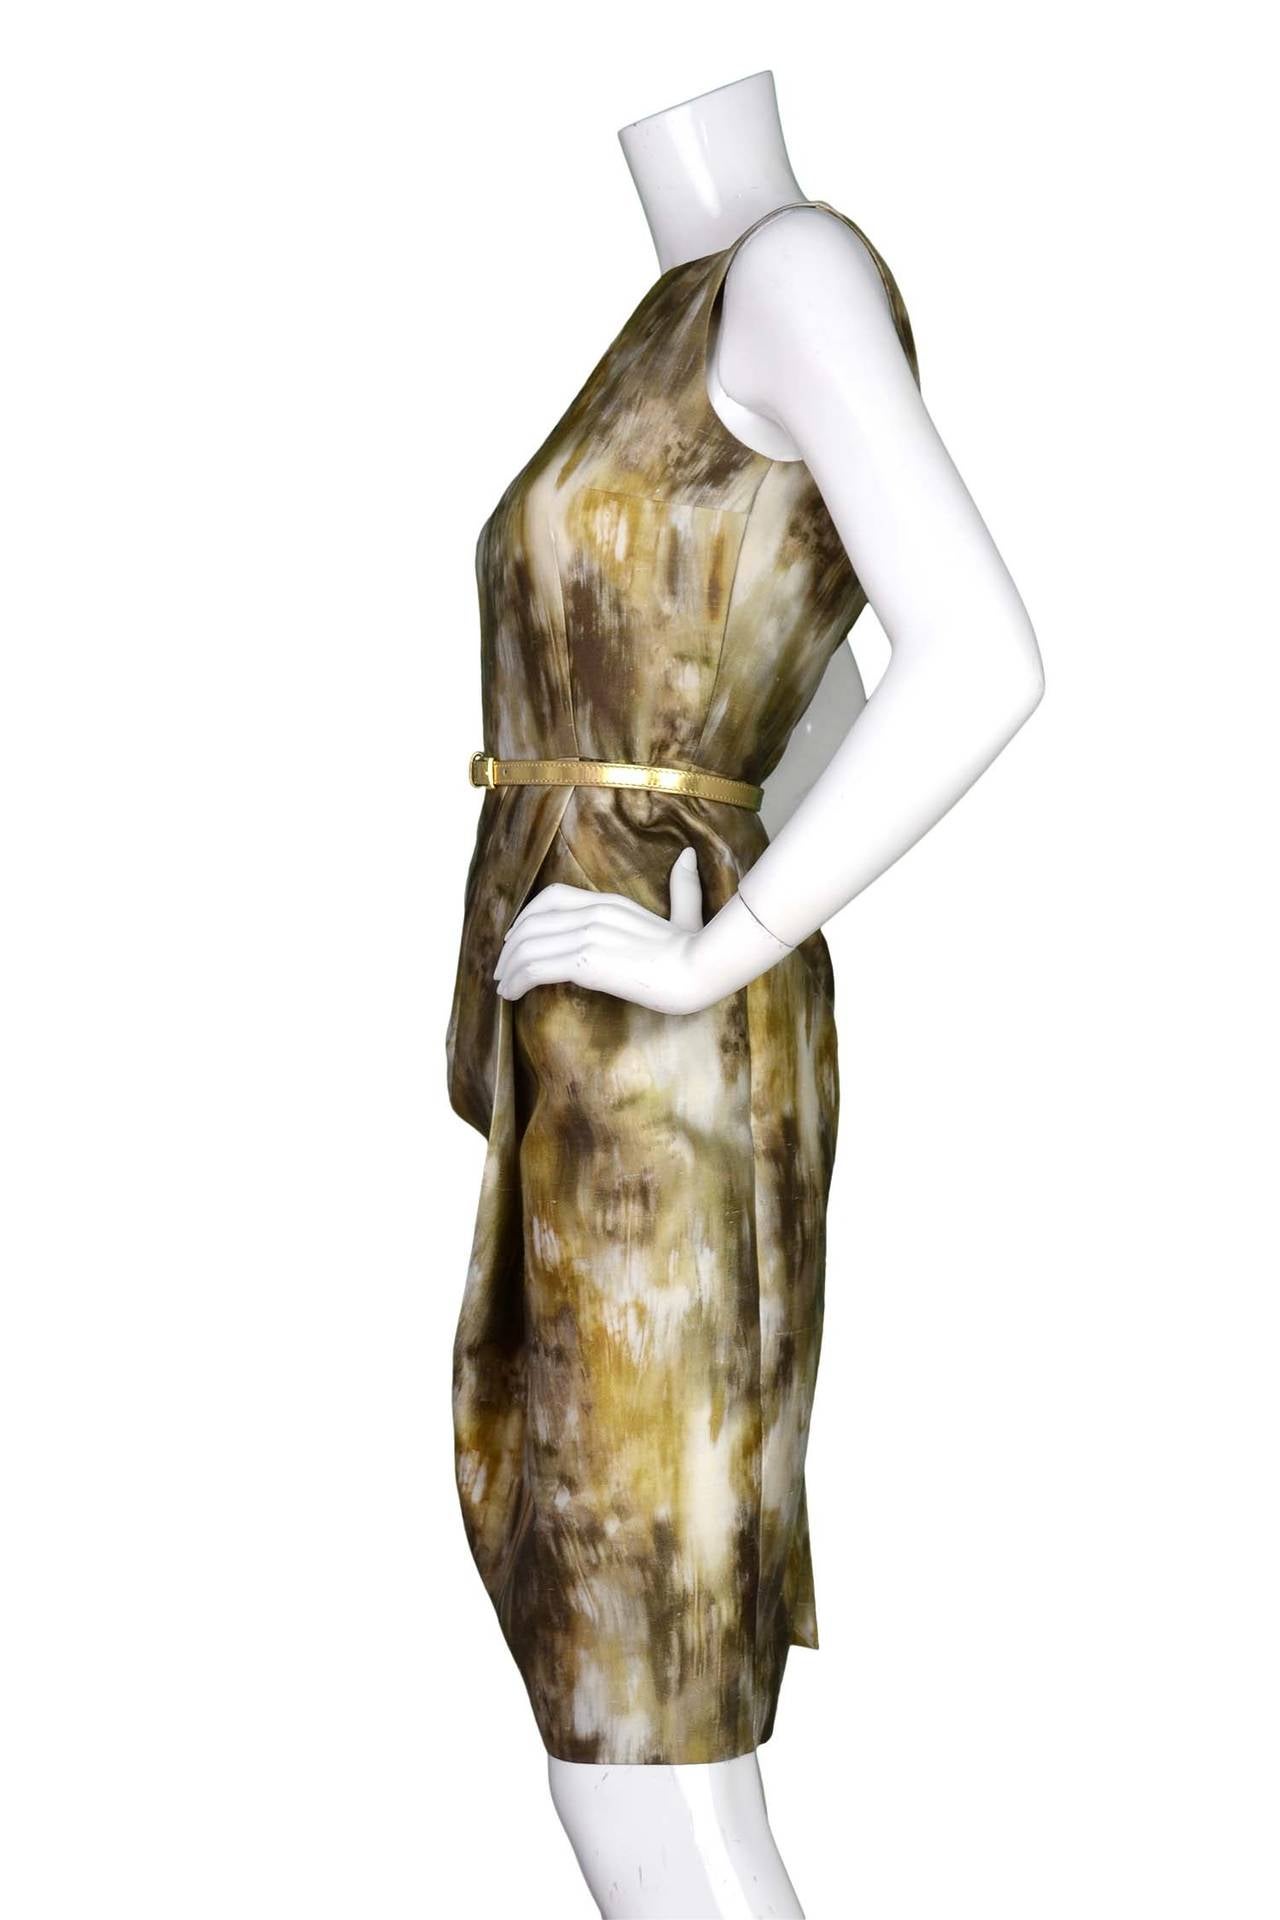 Michael Kors Brown/Olive Green/Beige Silk Brush Strokes Print DressFeatures adjustable matching belt

    Made in: Italy
    Color: Brown, olive green, beige, and yellow
    Composition: 50% wool, 50% silk
    Lining: Off-white fine textile
  